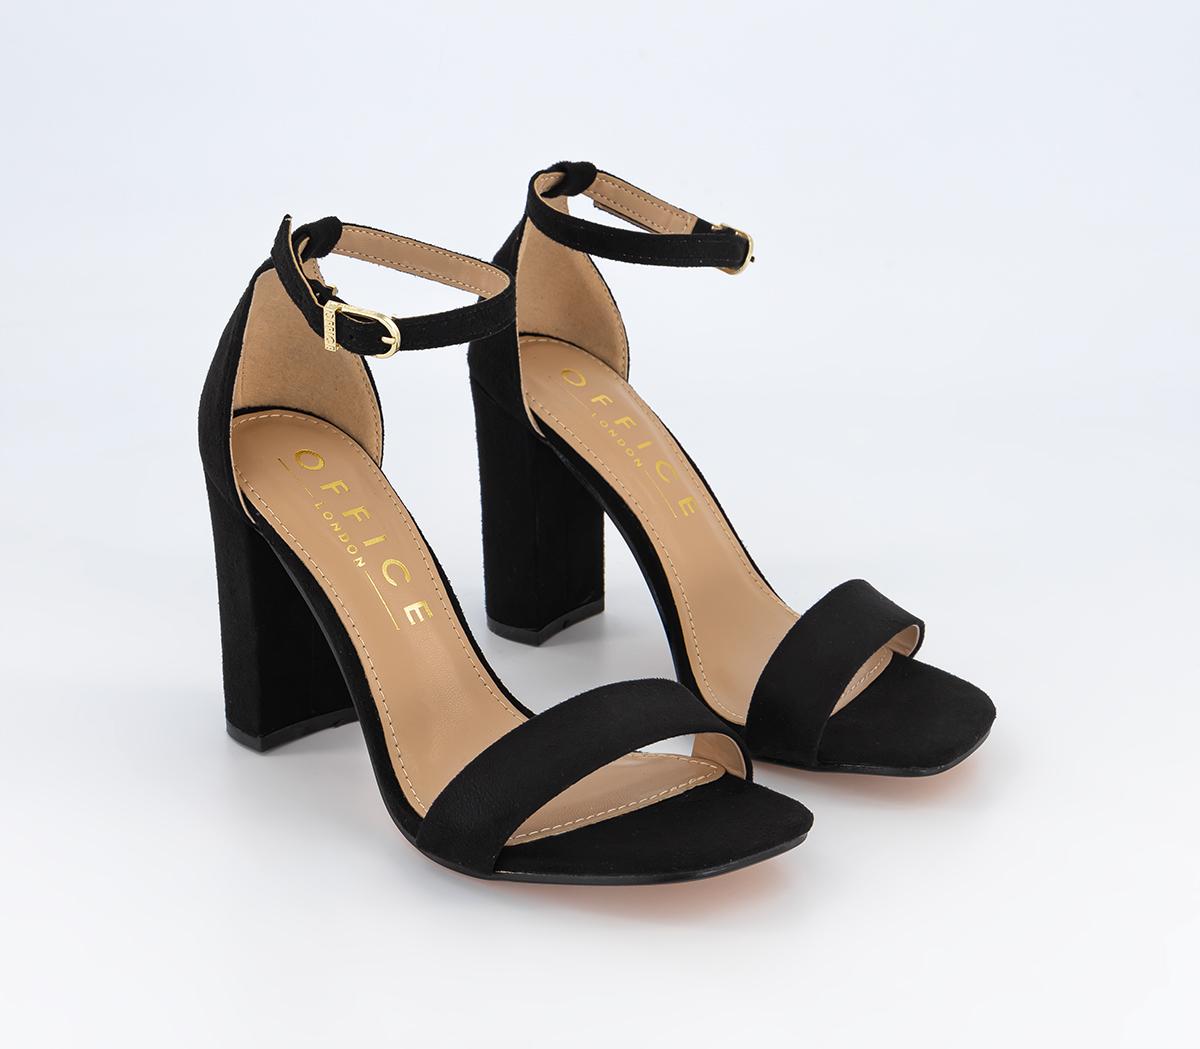 OFFICE Wide Fit: Heart Land Two Part Sandals Black - High Heels